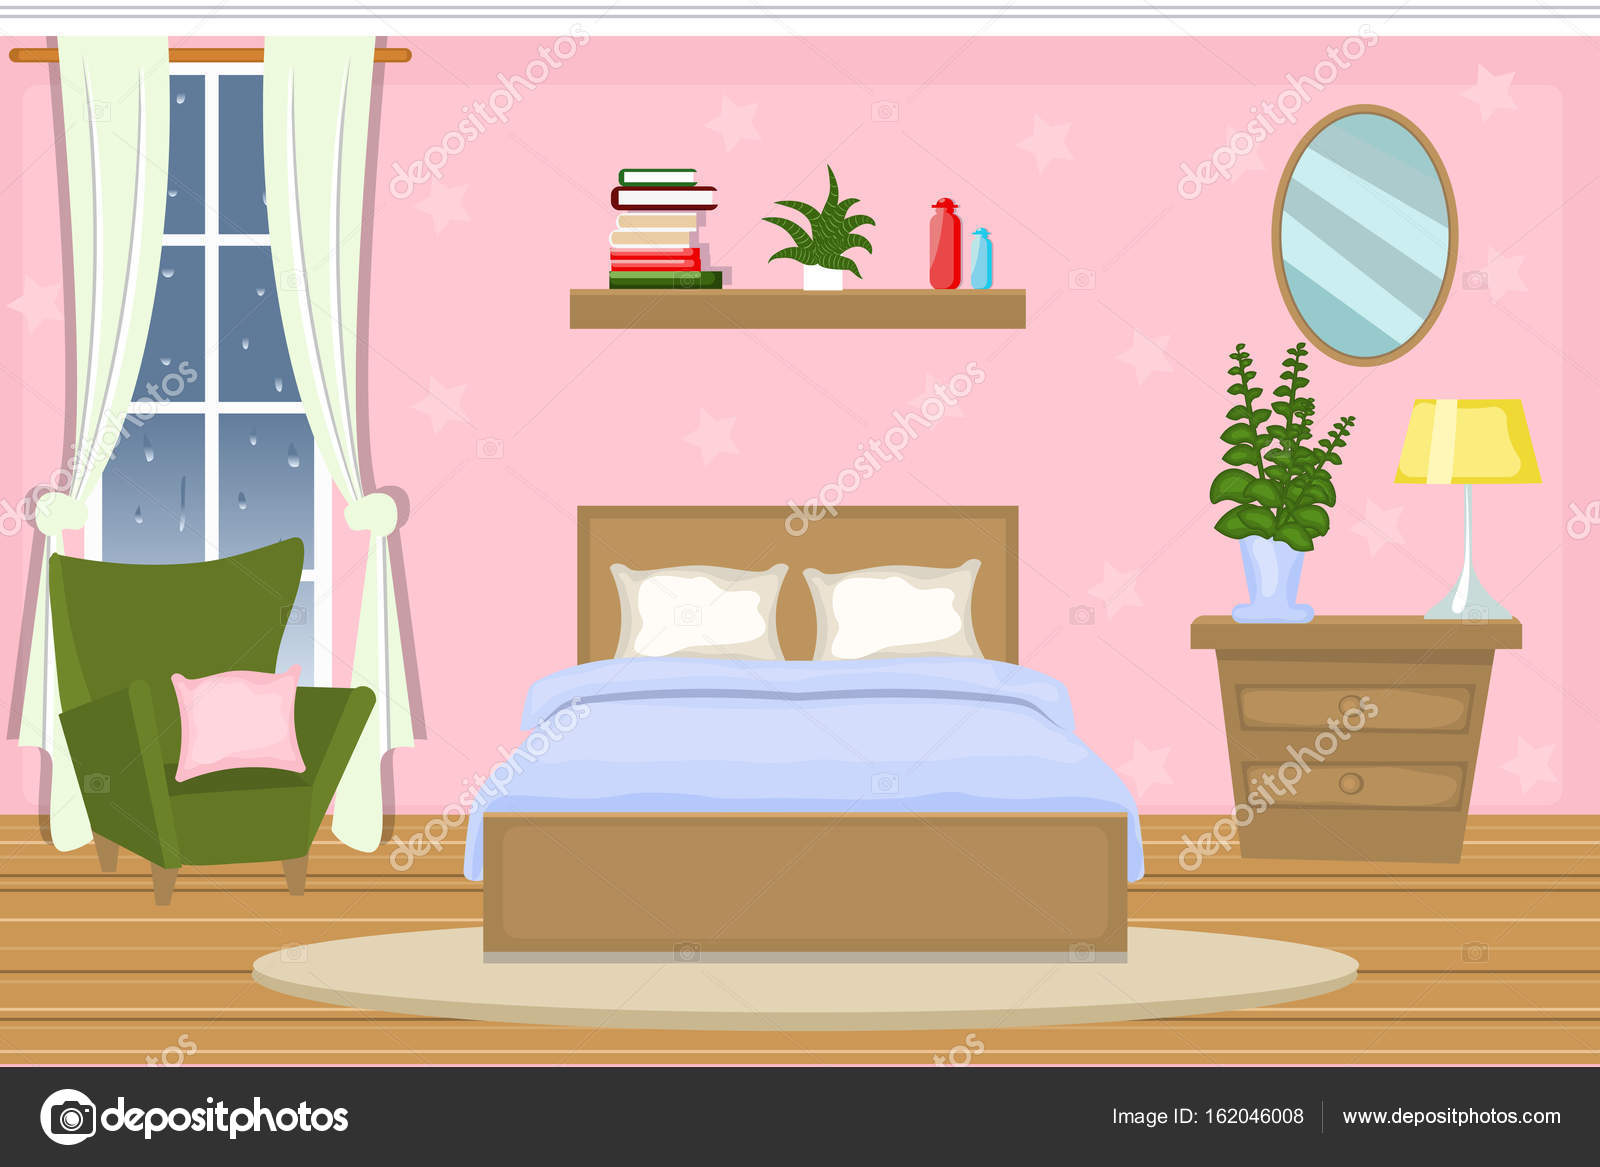 depositphotos_162046008 stock illustration the interior of the bedroom